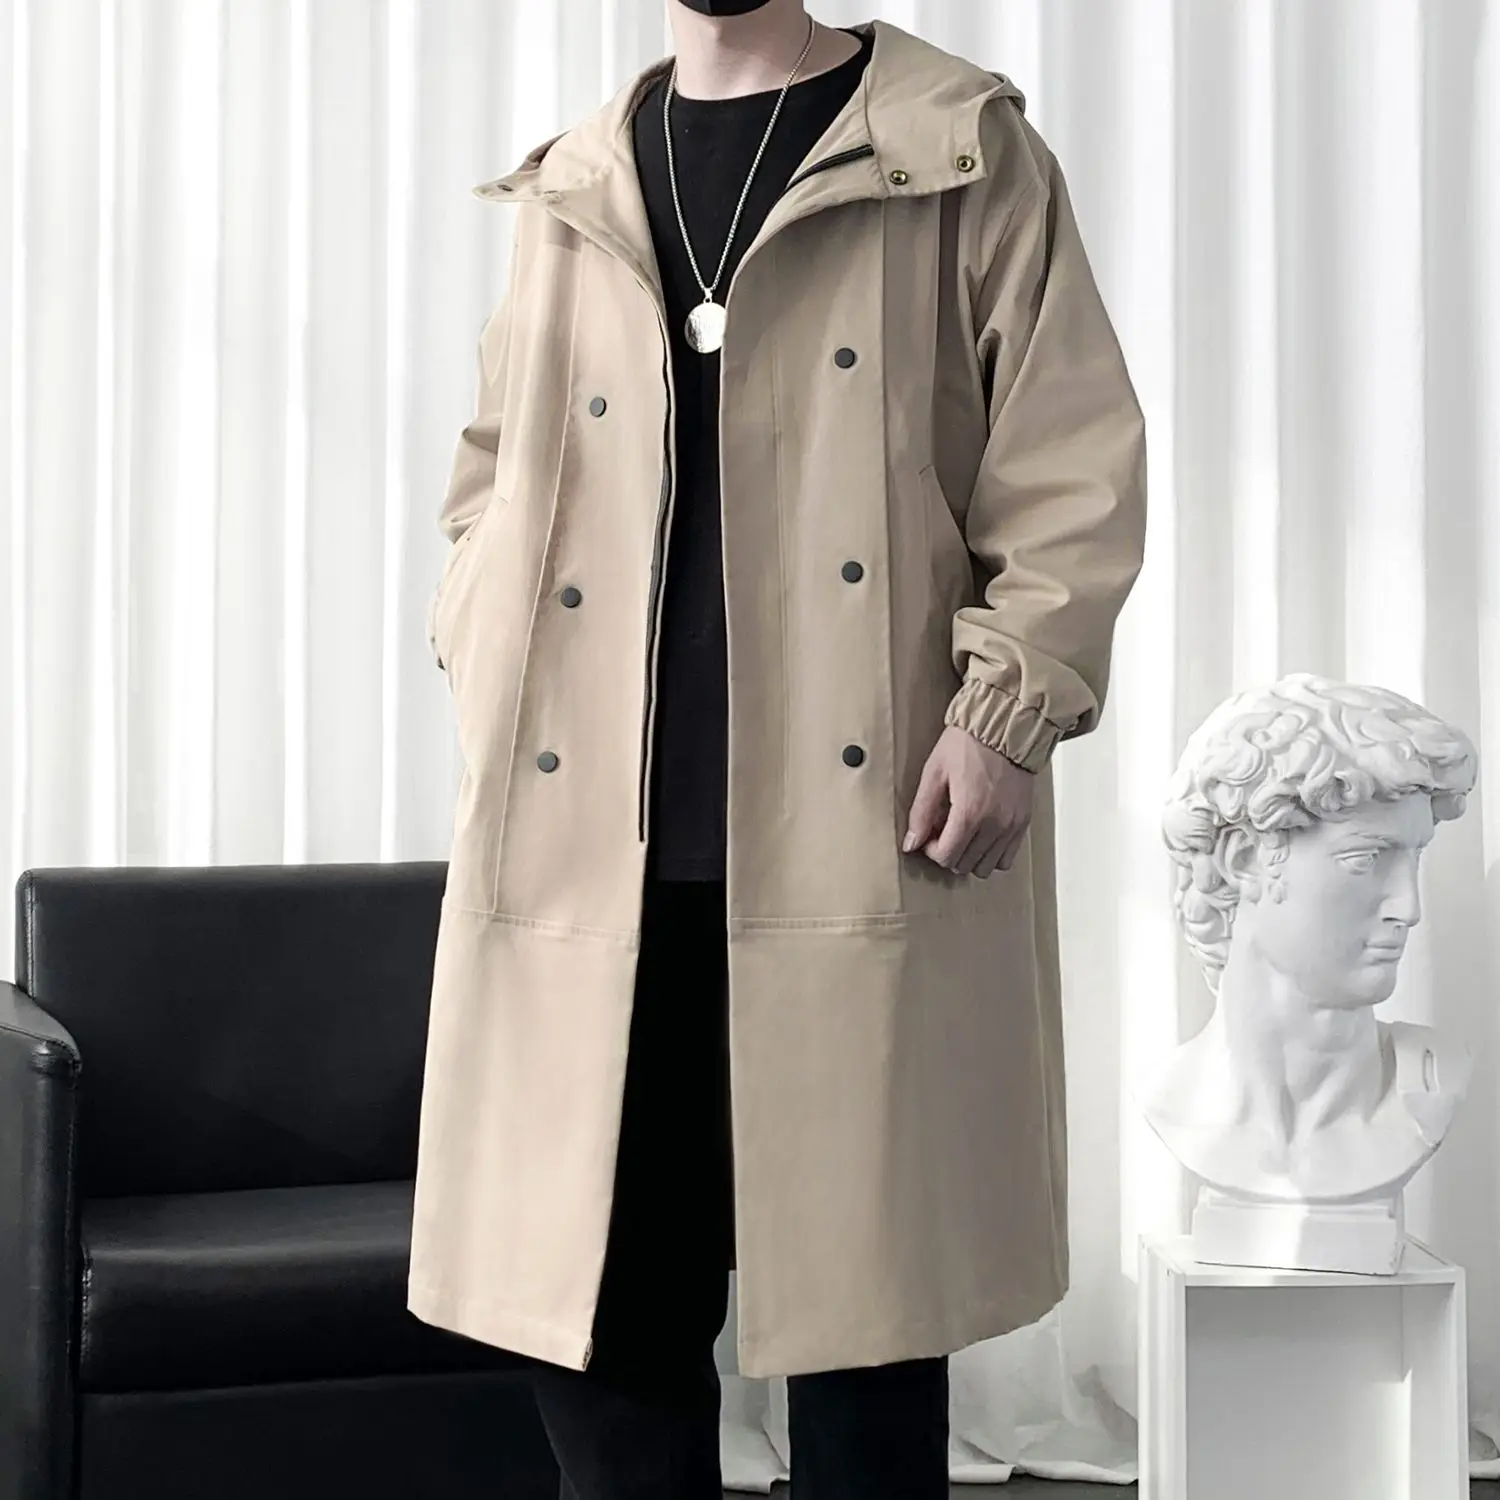 

2023 New Arrival Autumn Fashion Long Sleeve Style Coat Men Solid Color Trench Coat Spring Mens Casual Jackets Full Size Q09